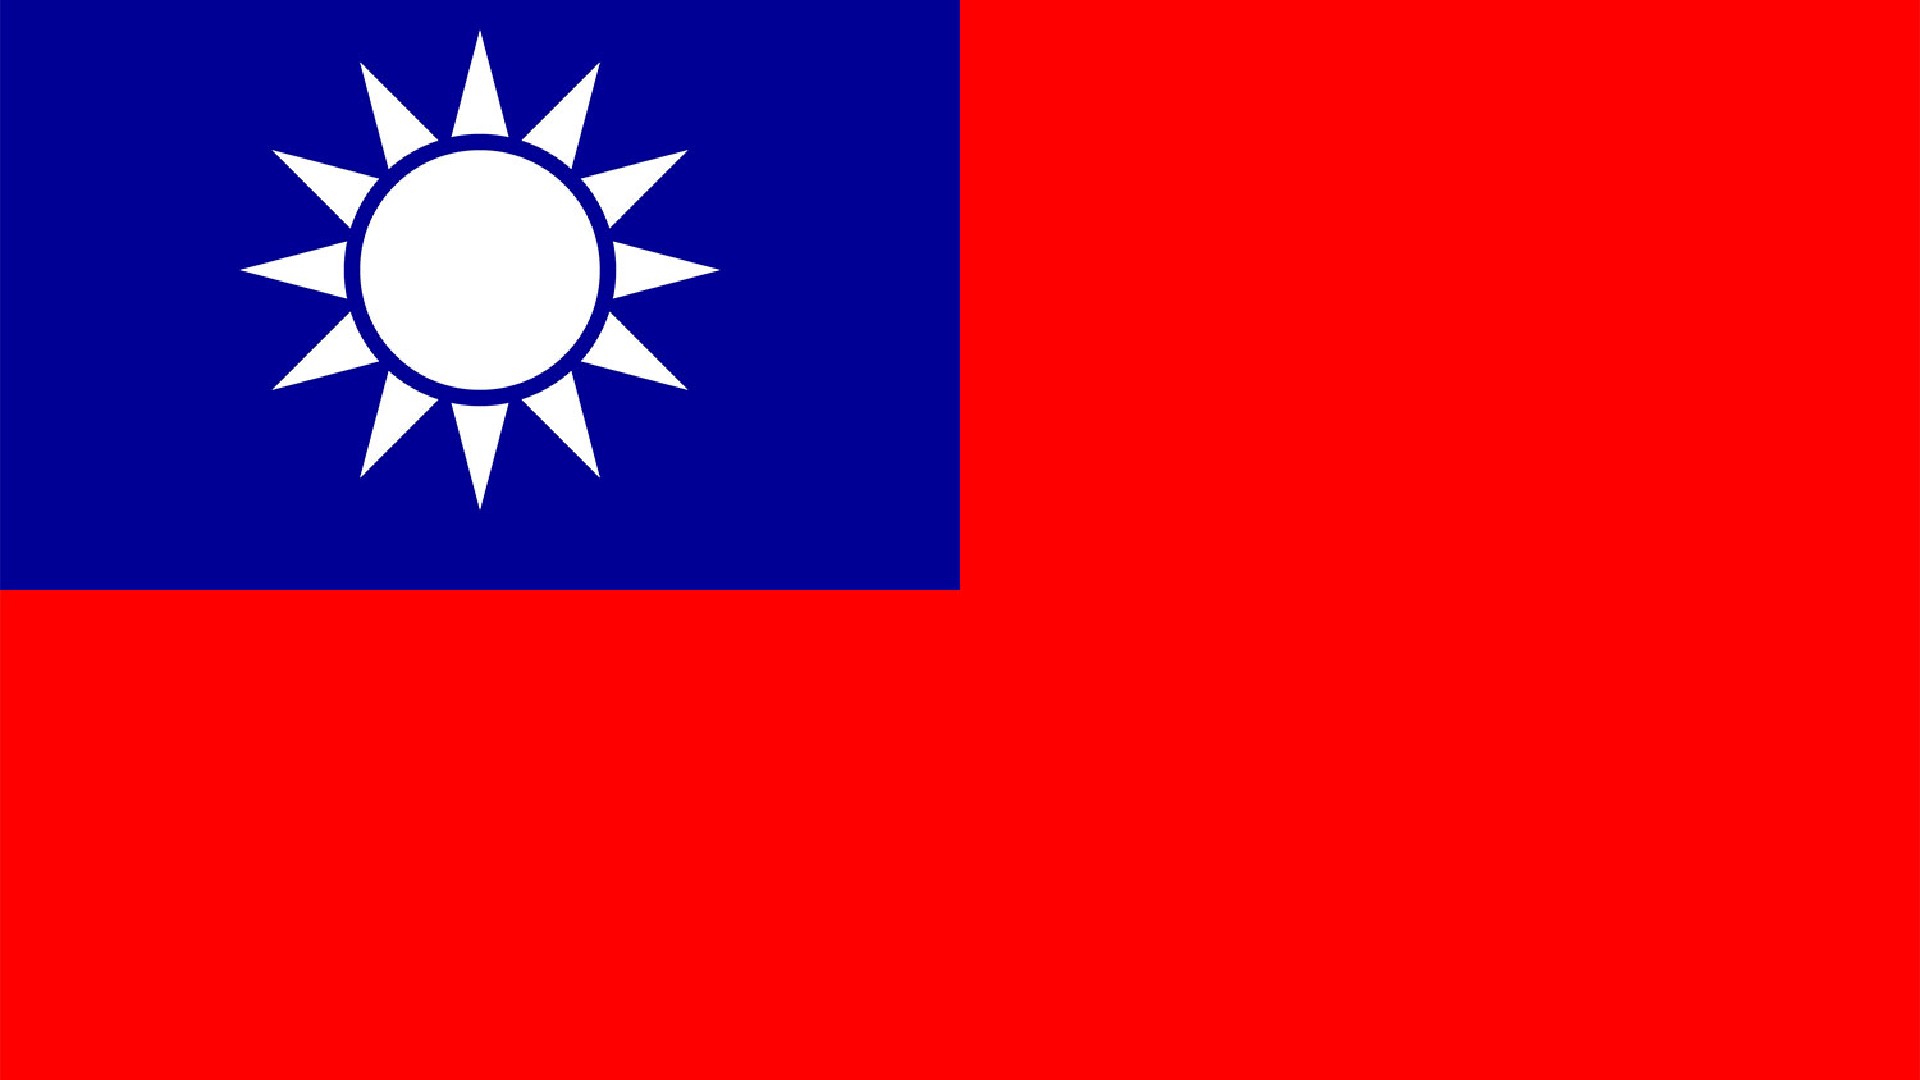 An image of the flag of Taiwan